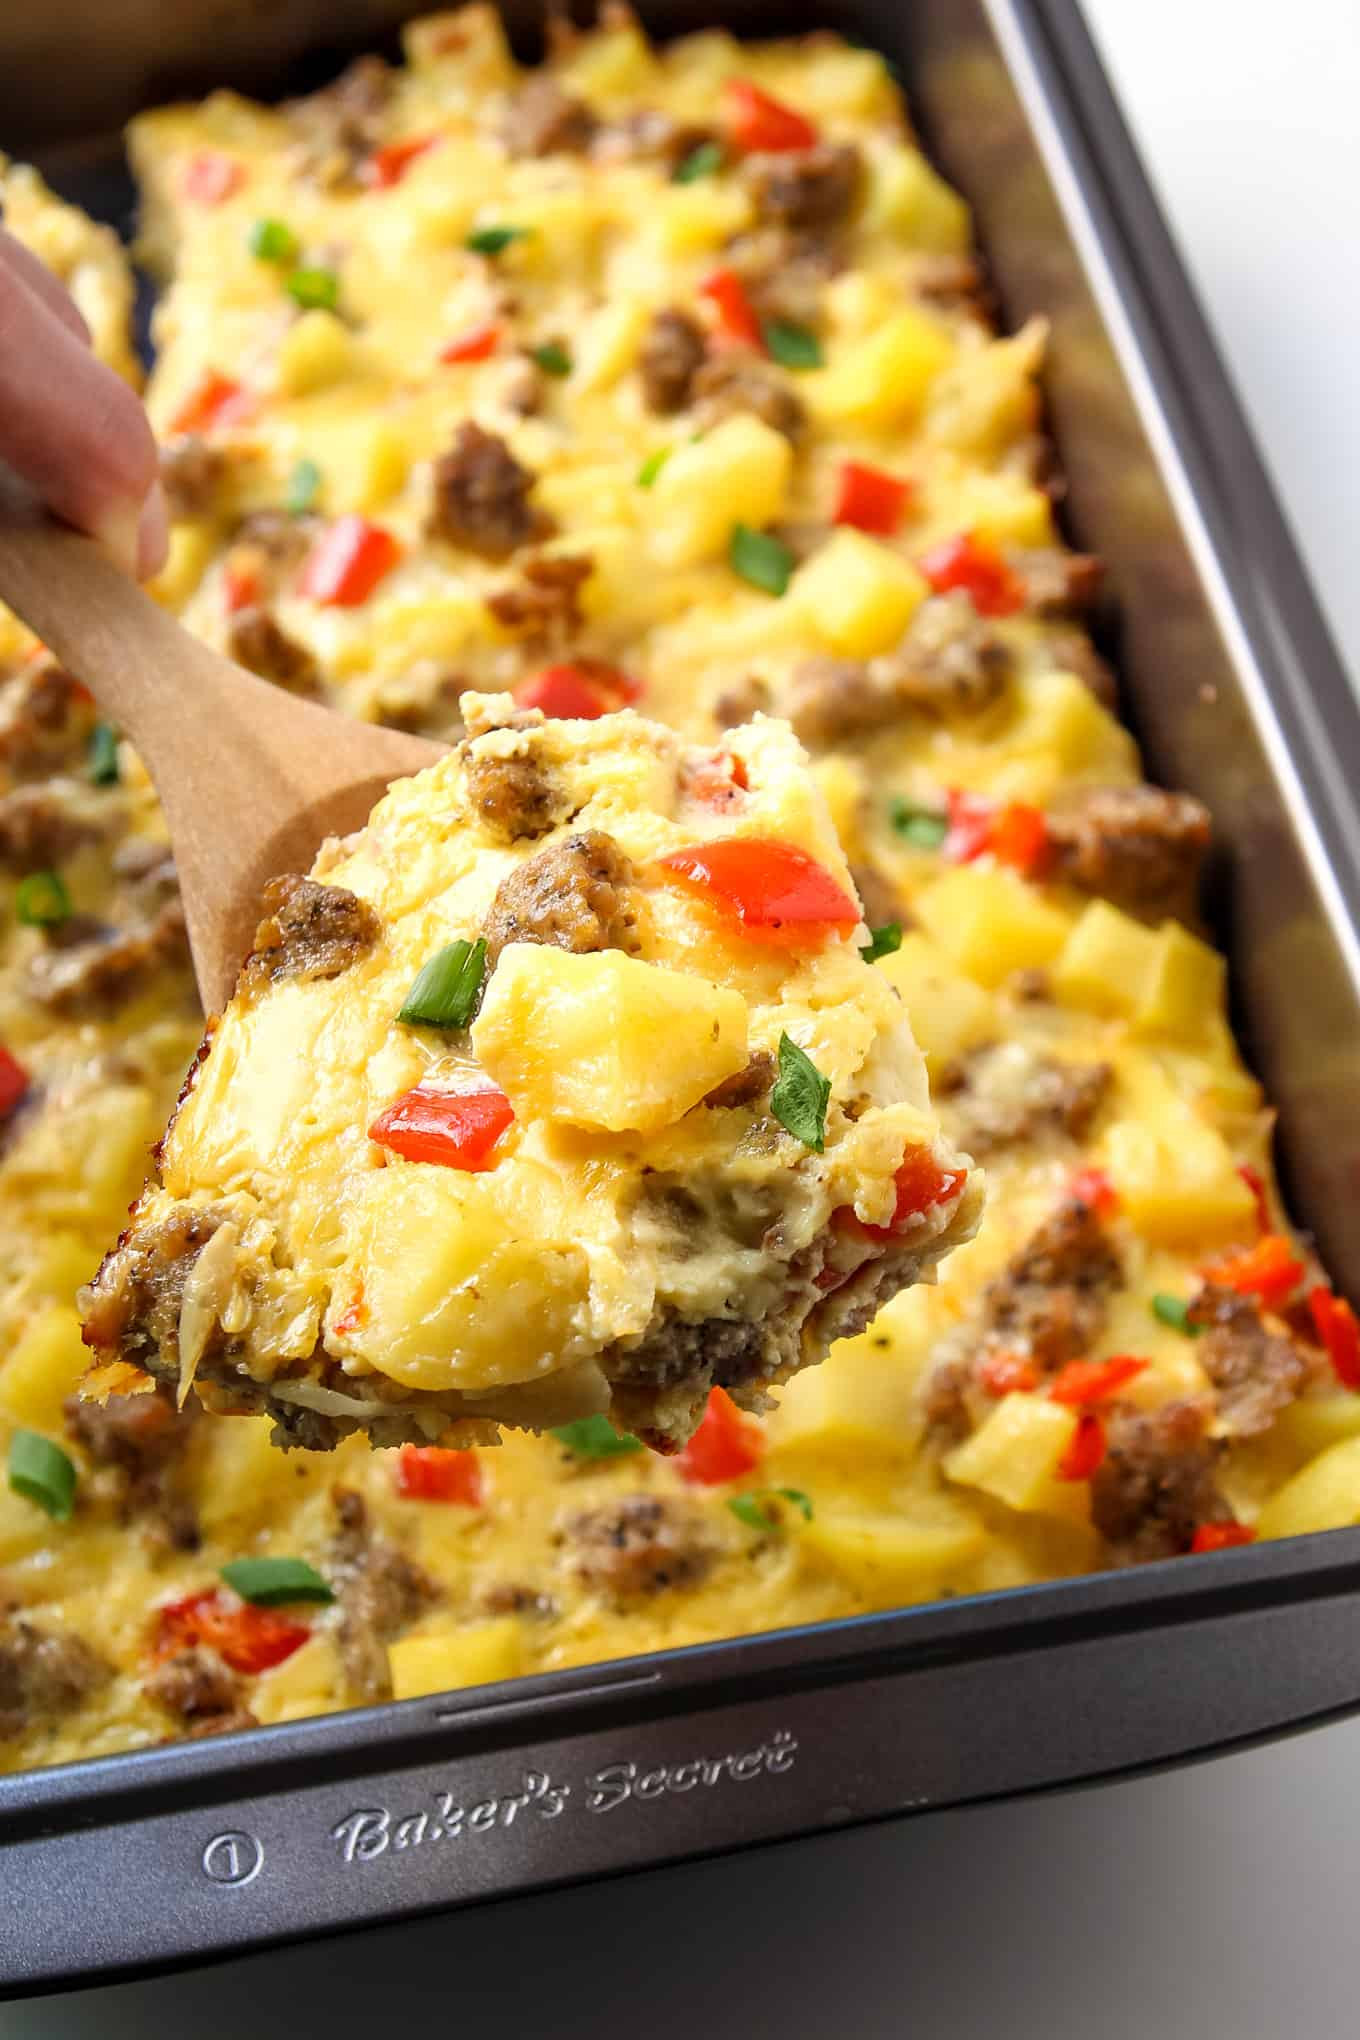 Breakfast Casserole With Potatoes Sausage Eggs And Cheese
 Breakfast Casserole with Eggs Potatoes and Sausage